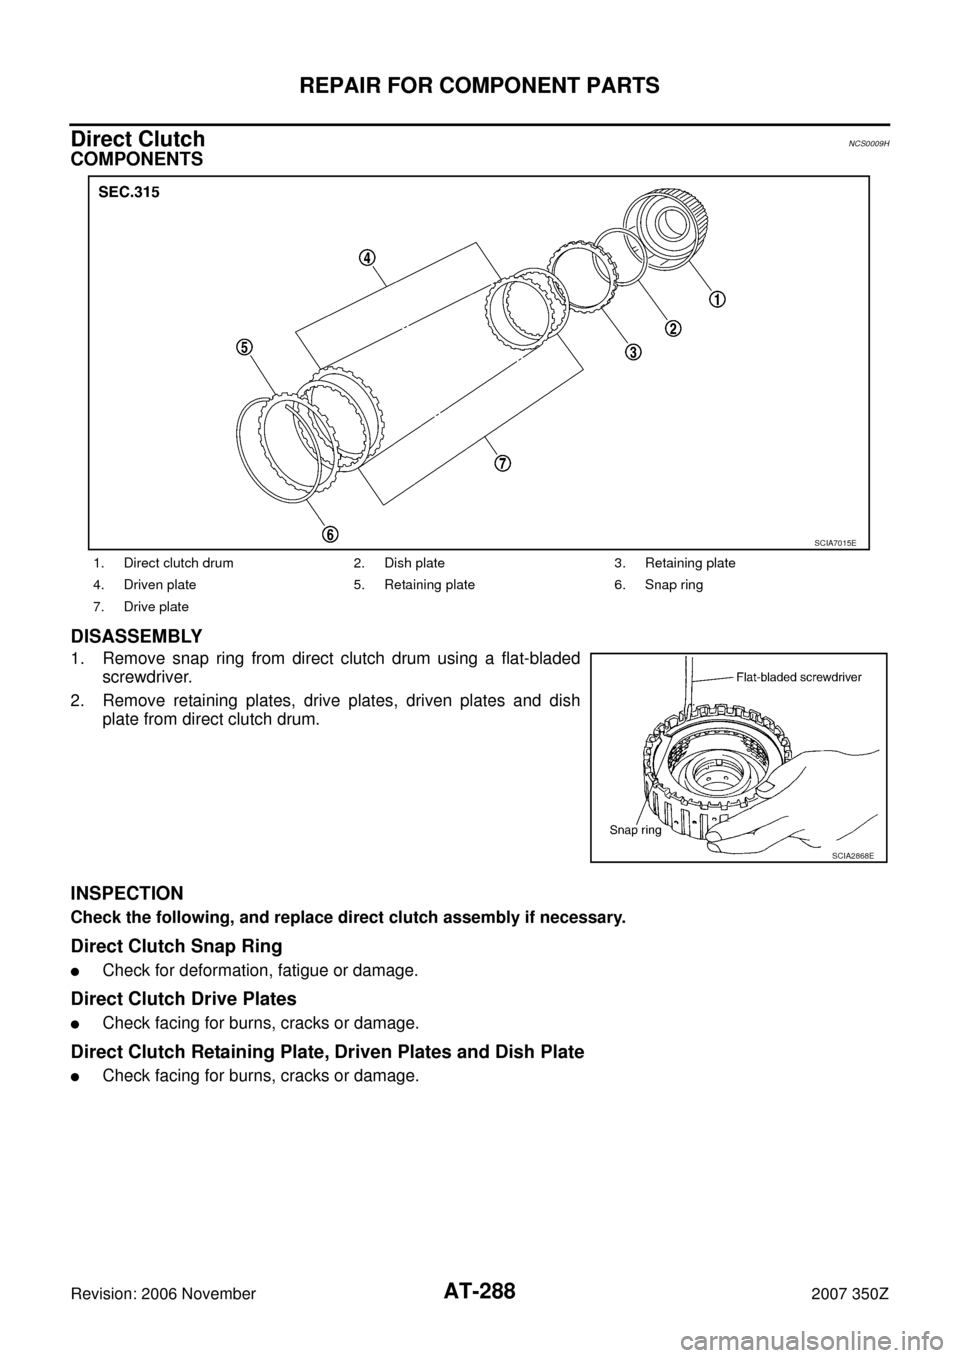 NISSAN 350Z 2007 Z33 Automatic Transmission Workshop Manual AT-288
REPAIR FOR COMPONENT PARTS
Revision: 2006 November2007 350Z
Direct ClutchNCS0009H
COMPONENTS
DISASSEMBLY
1. Remove snap ring from direct clutch drum using a flat-bladed
screwdriver.
2. Remove r